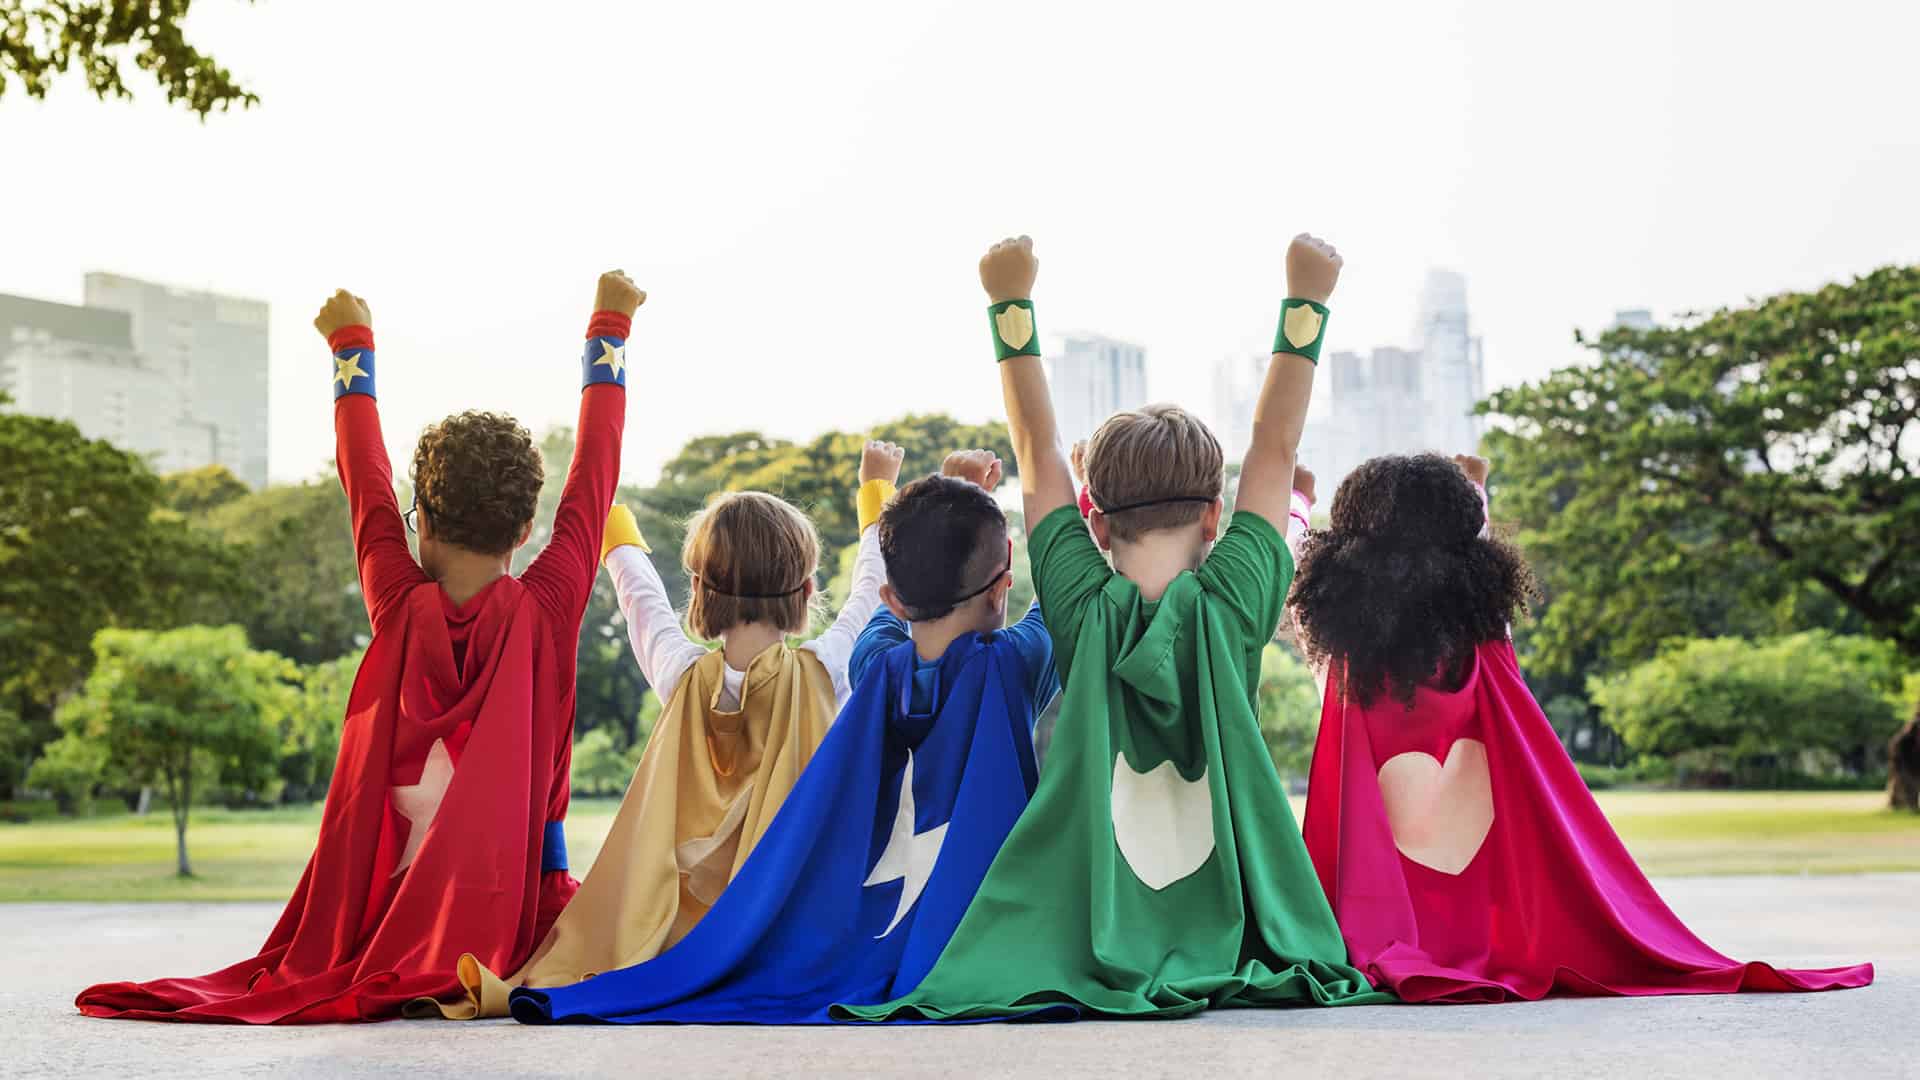 Children with colorful capes and hands up, image of sponsorship section.